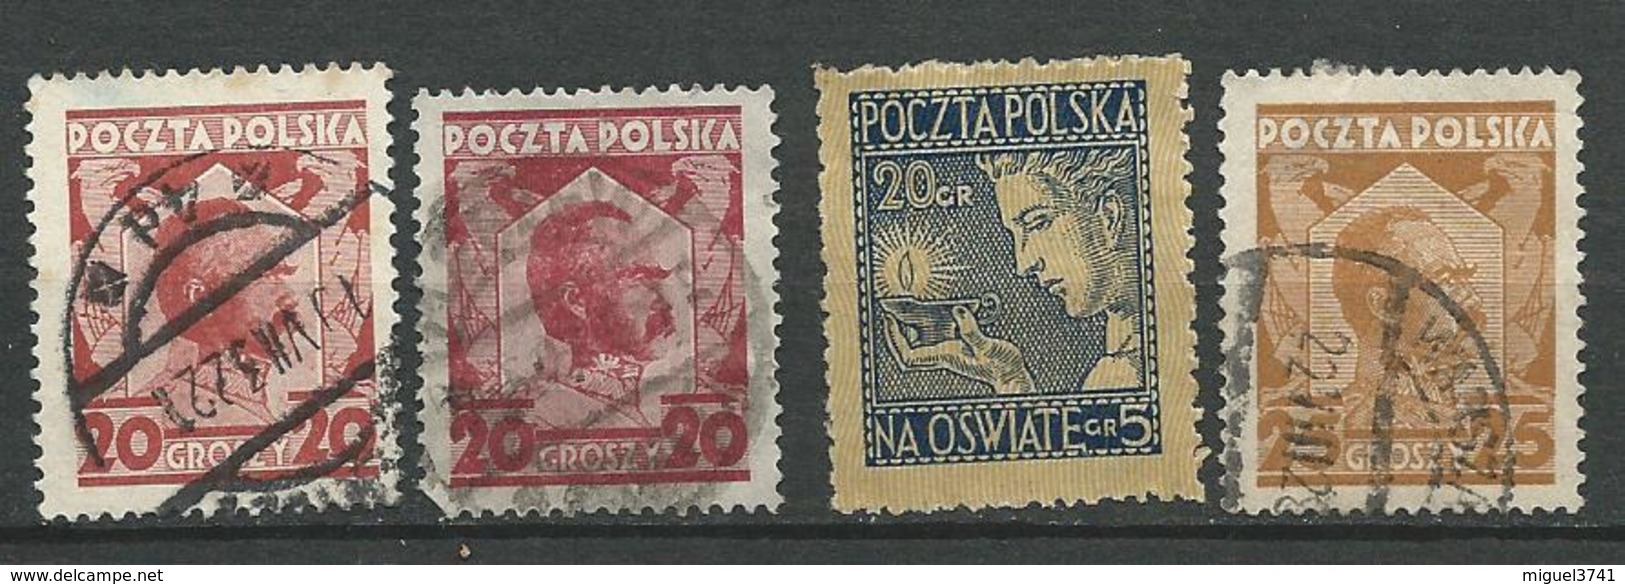 POLOGNE  ANNEE 1928  - 4 TIMBRES  OBLITERE VOIR SCAN - Usati